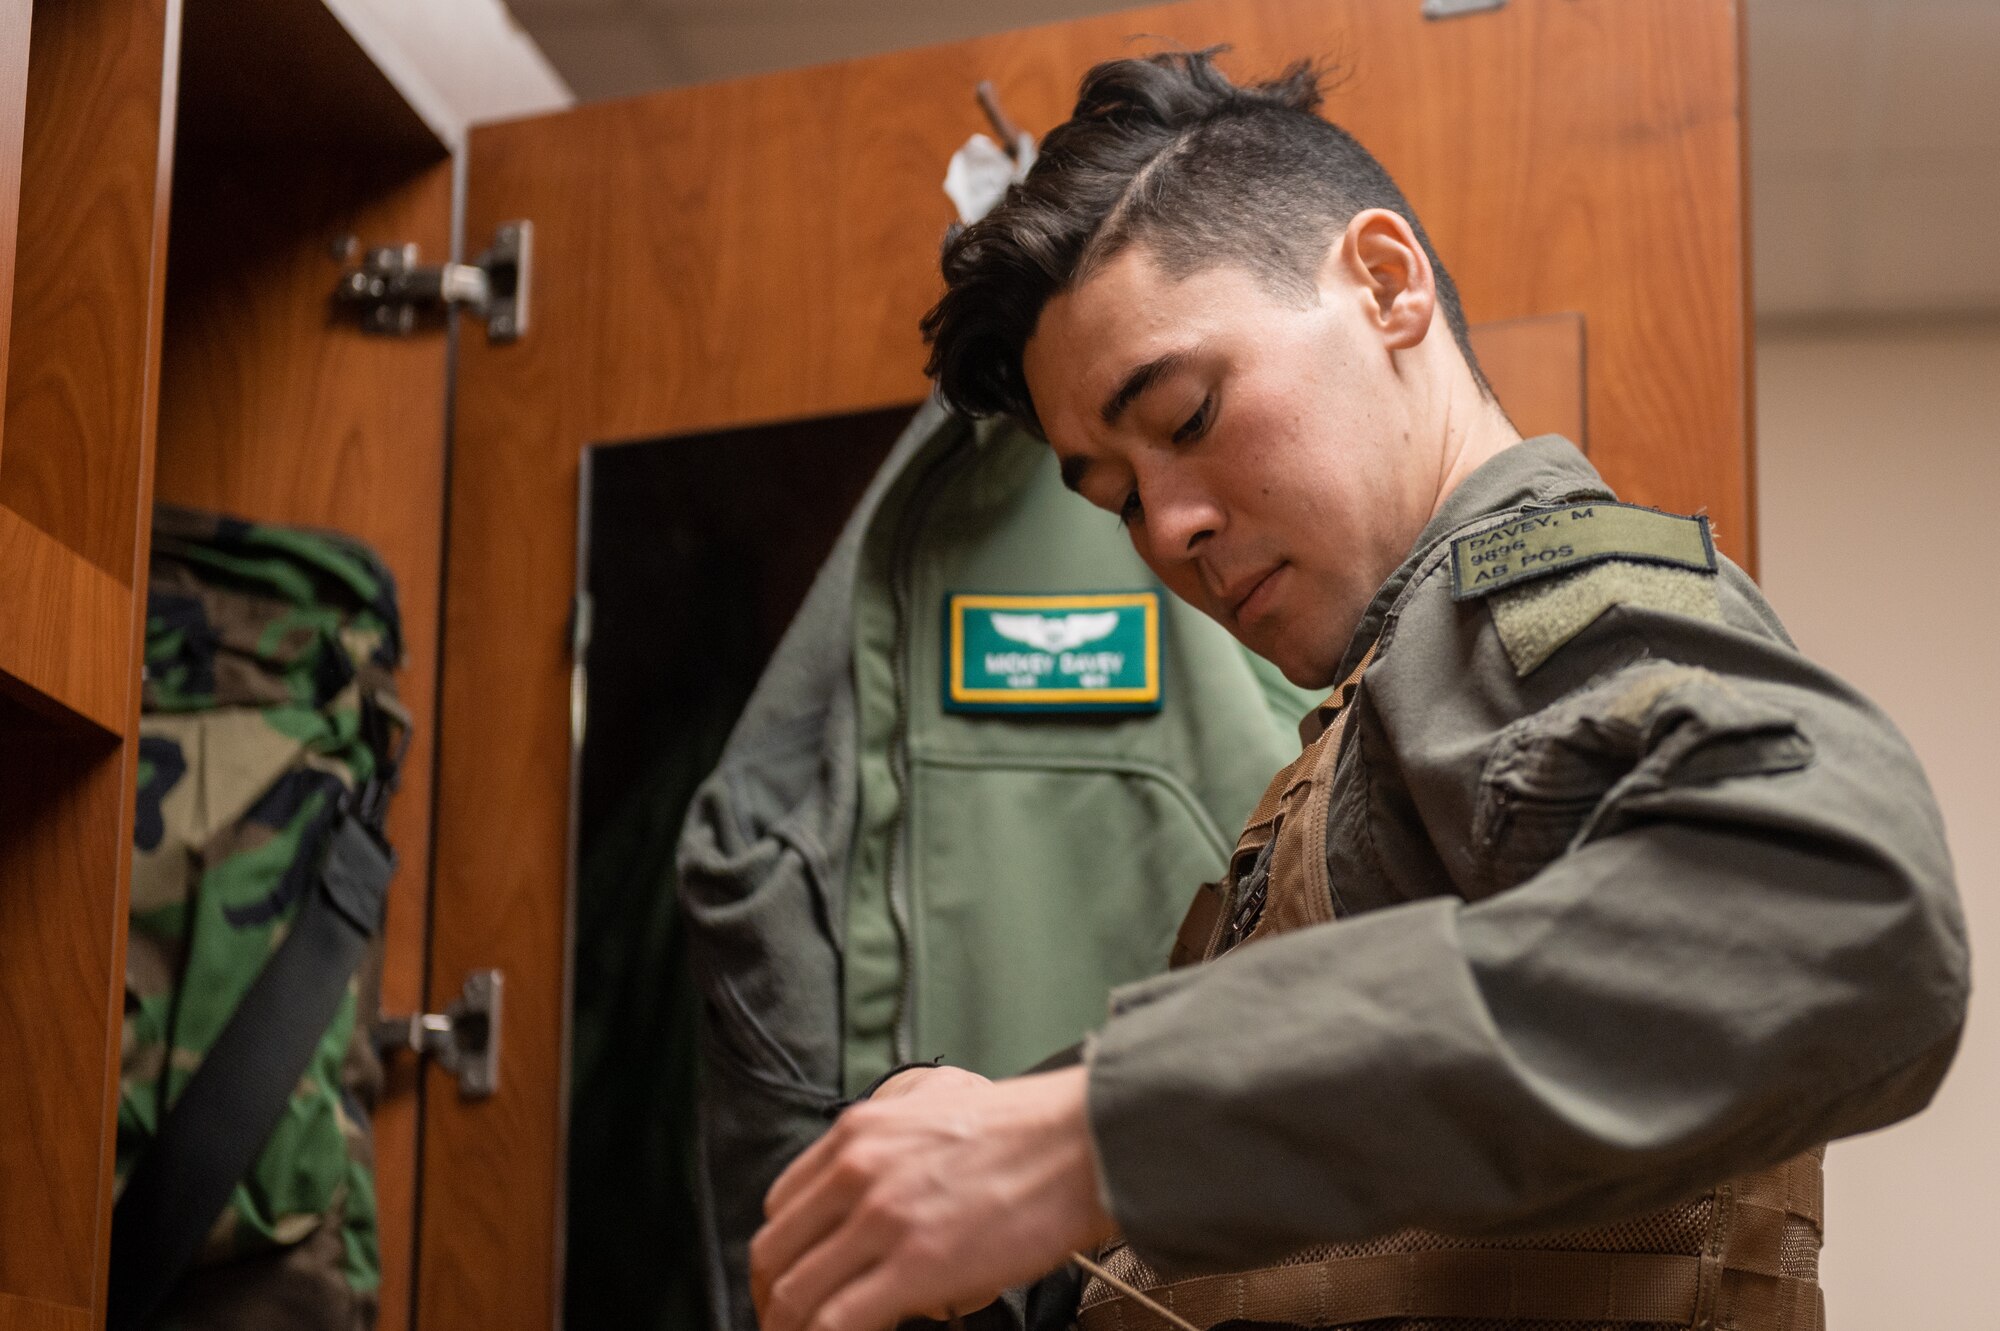 U.S. Air Force 1st Lt. Michael Davey, 25th Fighter Squadron A-10C Thunderbolt II pilot, dons flight equipment before participating in a next generation aircrew protection (NGAP) evaluation at Osan Air Base, Republic of Korea, Jan. 18, 2023.